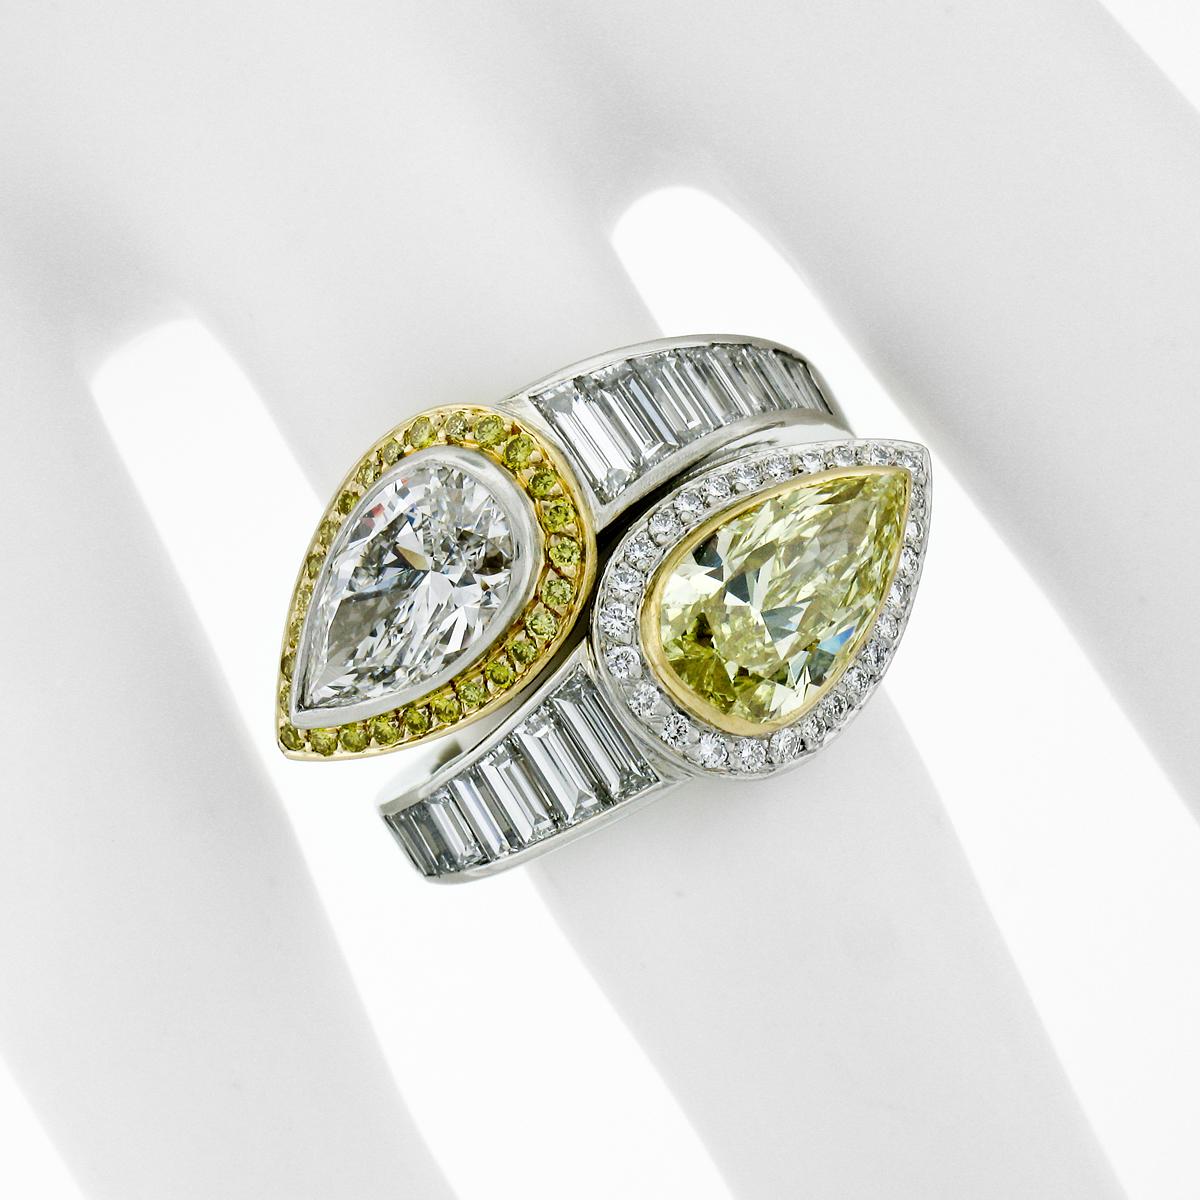 This absolutely magnificent bypass engagement/right hand ring was crafted from solid .950 platinum and 18k yellow gold and features a pair of large, GIA certified, pear cut diamonds - one fancy yellow and one colorless. The fancy yellow diamond